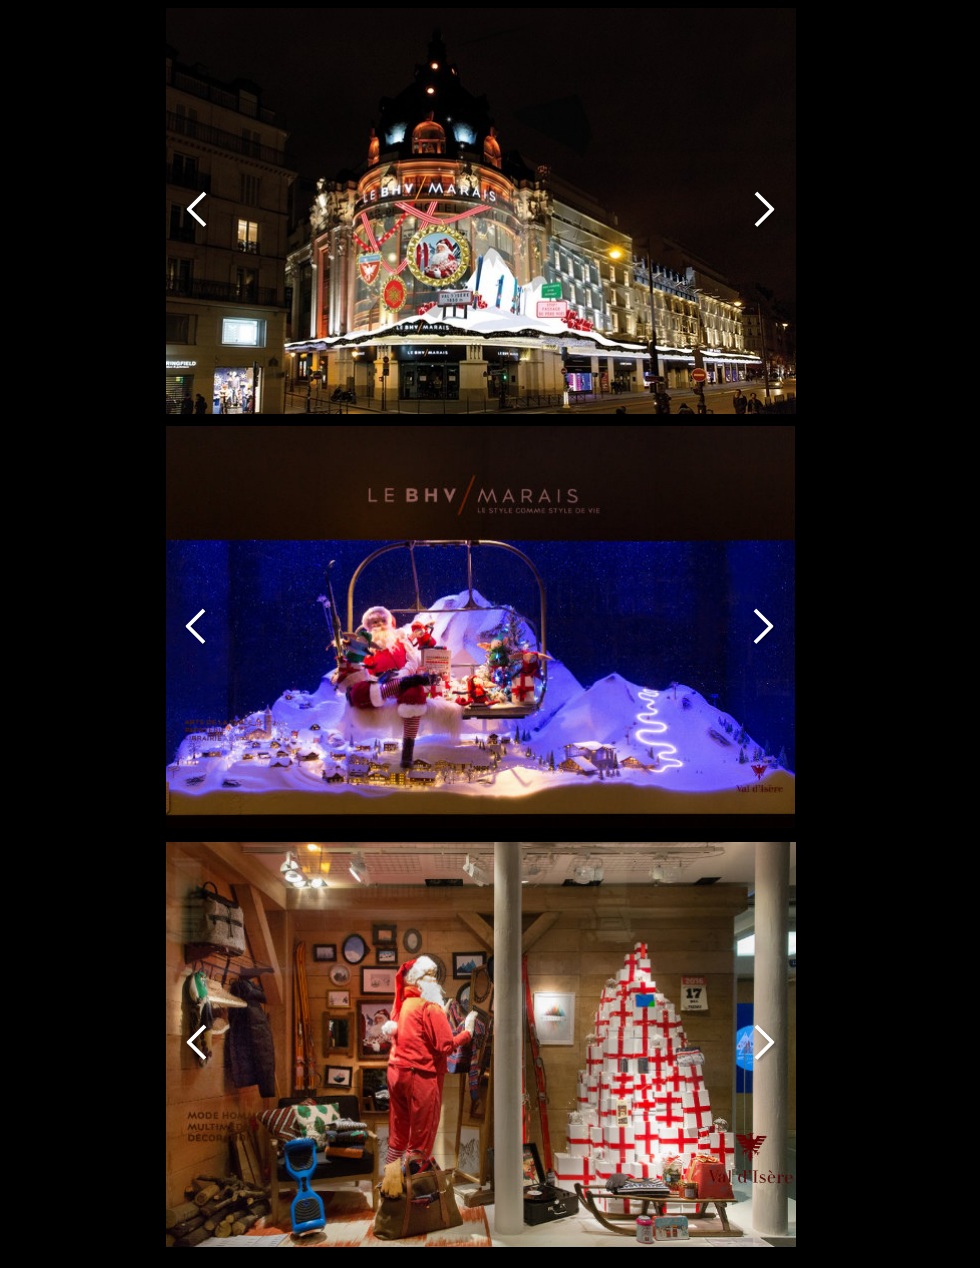 Most Beautiful Christmas Windows Displays in Paris ➤To see more Interior Design Shop ideas visit us at http://interiordesignshop.net/ #interiordesignshop #bestshops #bestinteriordesignshops @intdesignshop